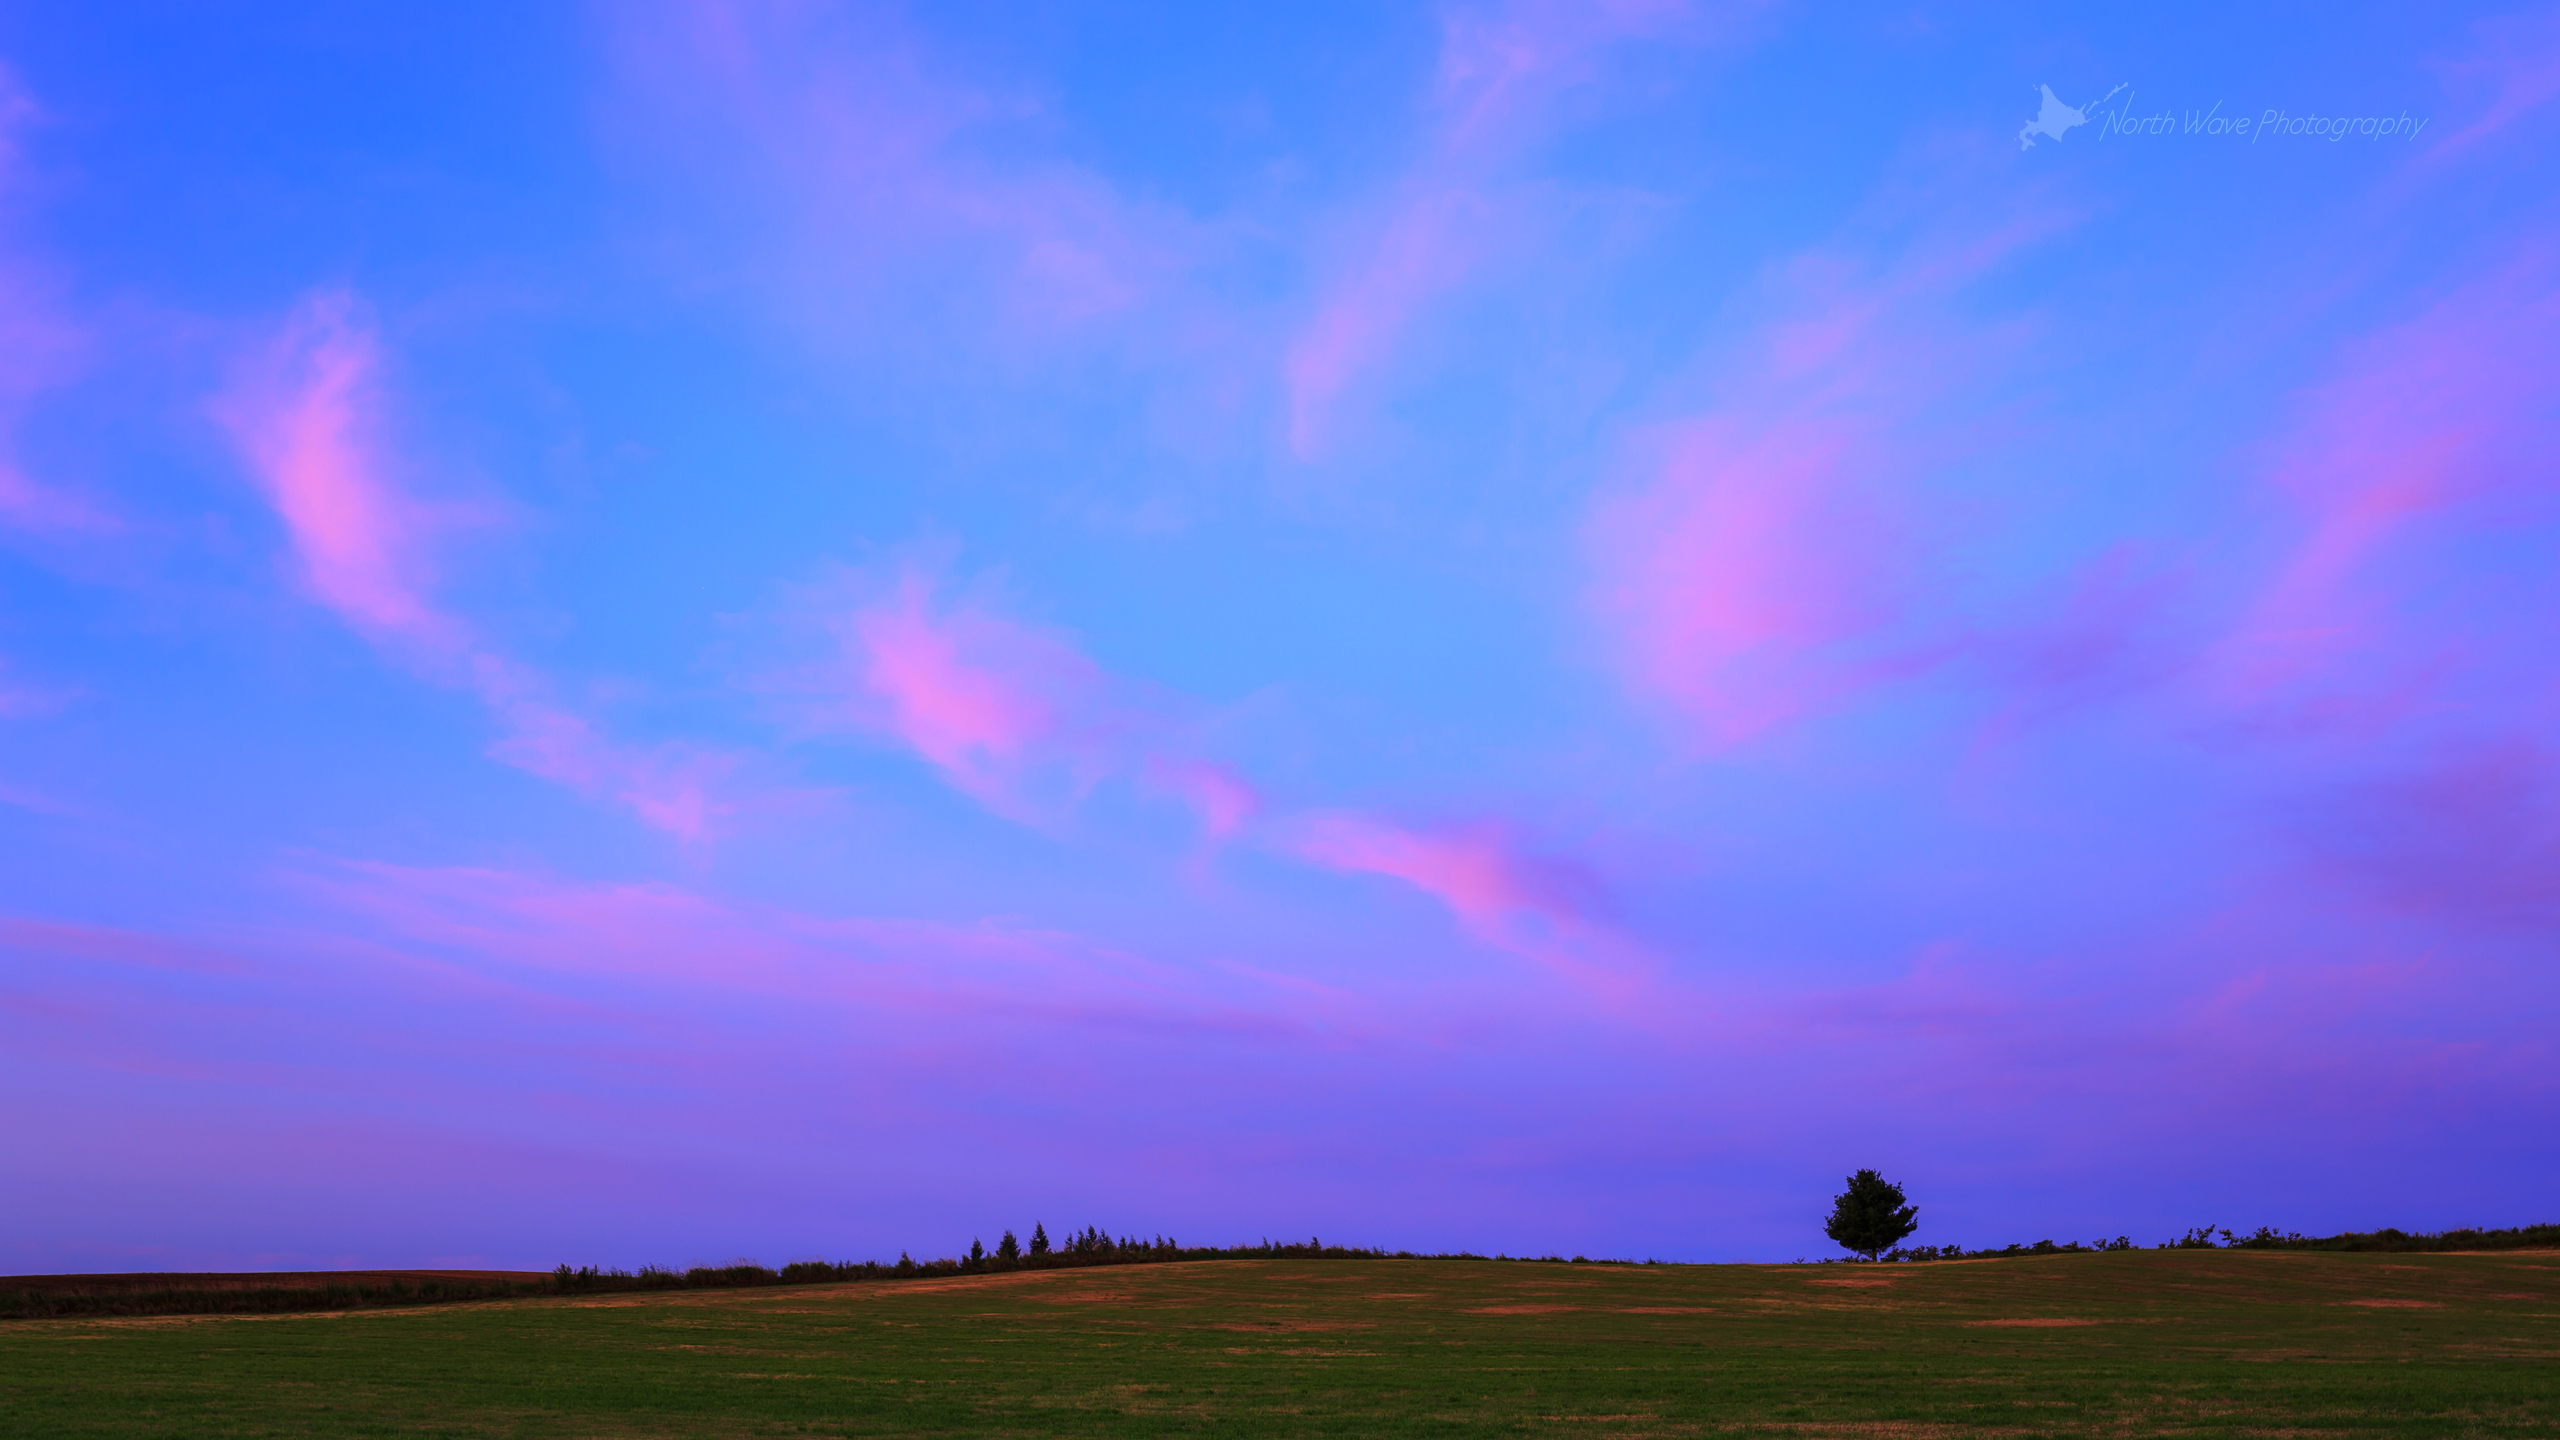 pink-clouds-and-a-tree-at-sunrise-for-imac-wallpaper